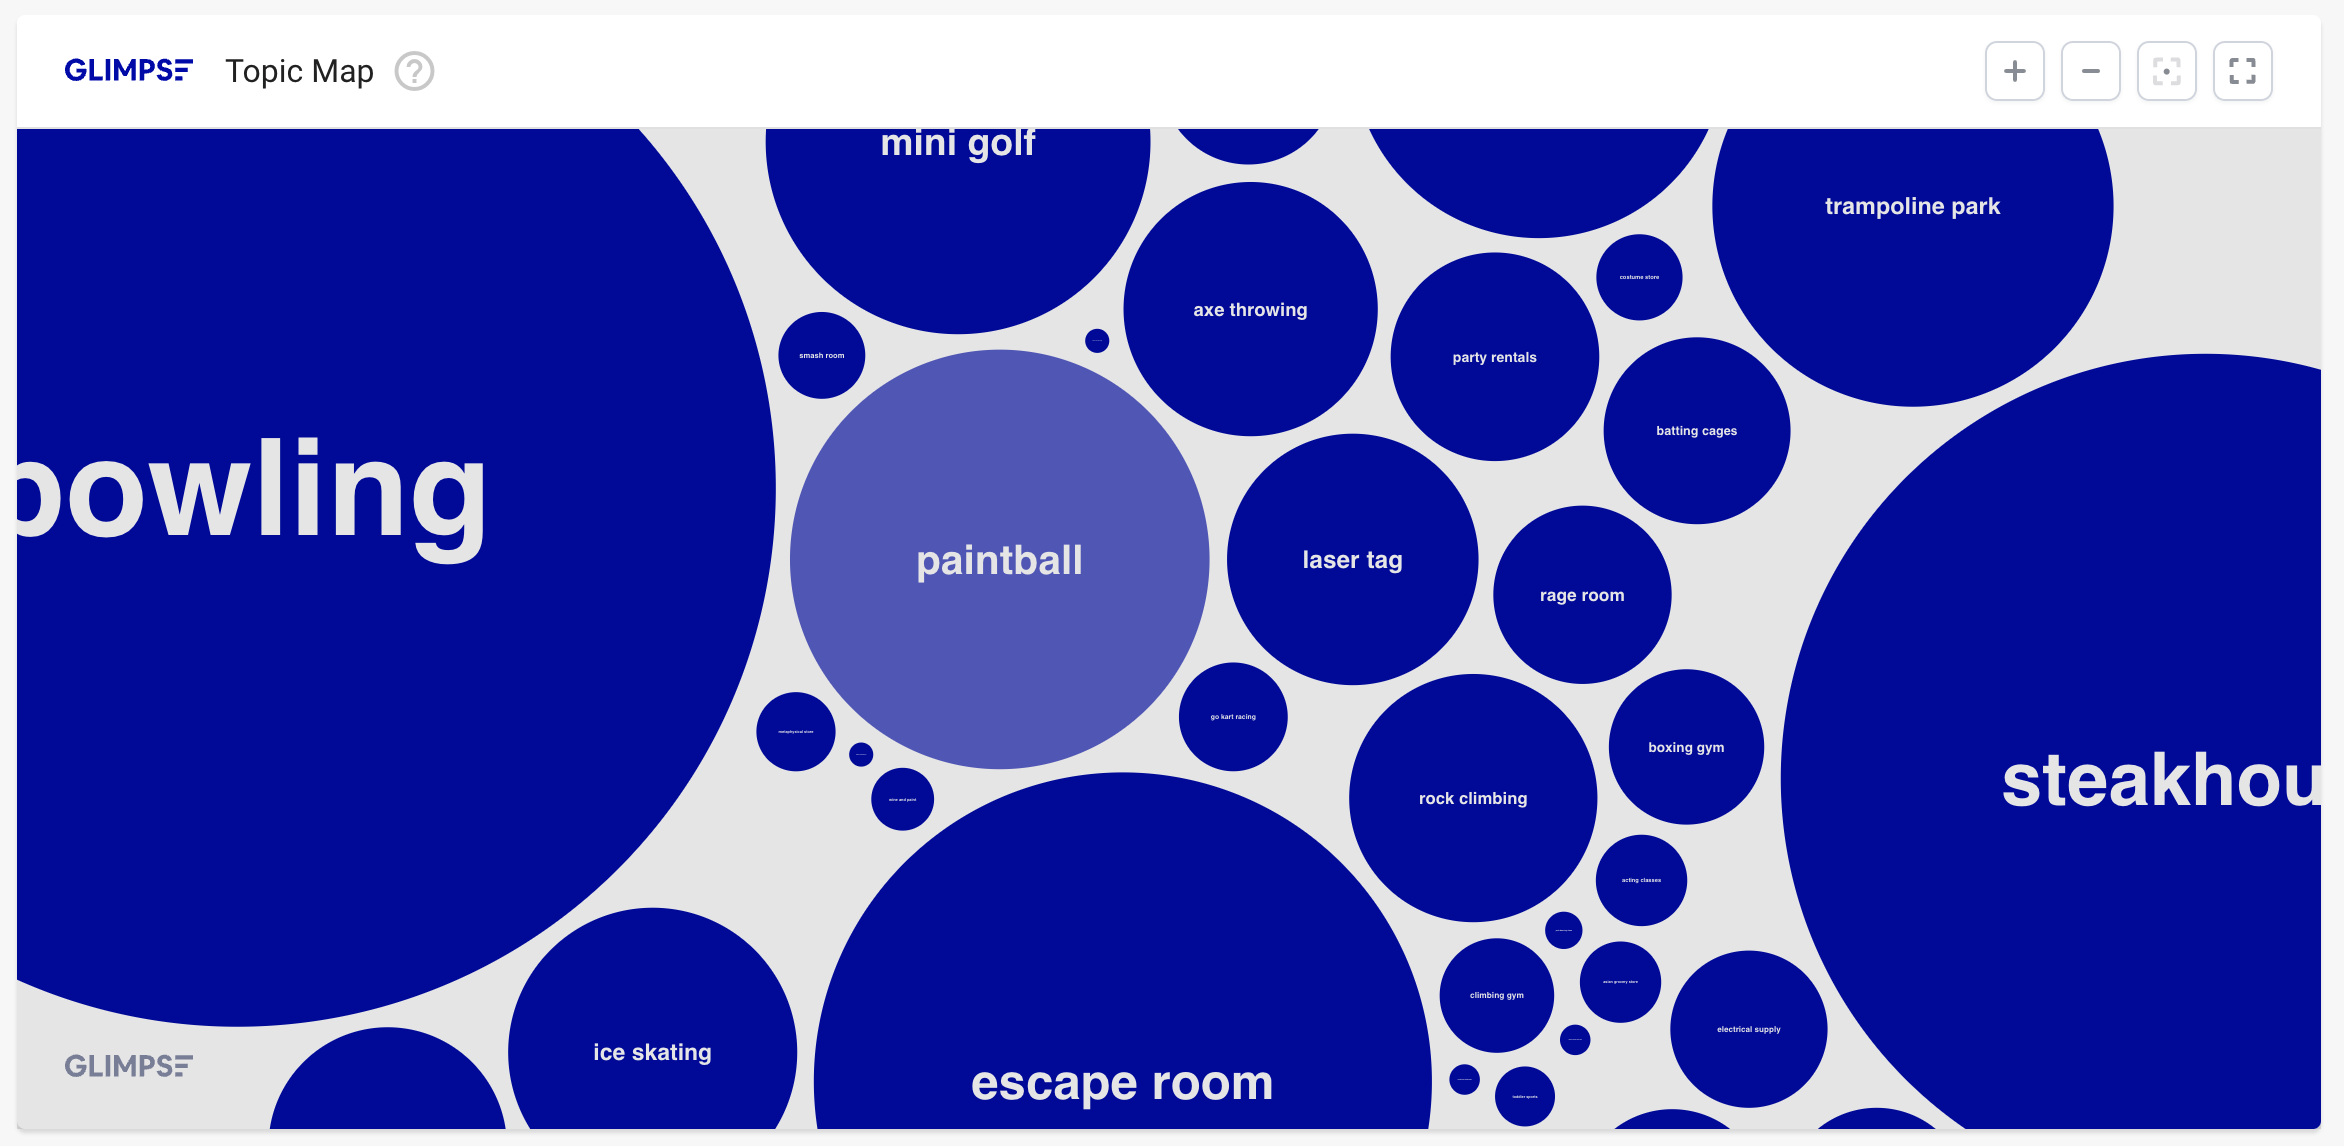 Glimpse topic map with the most mentioned words.